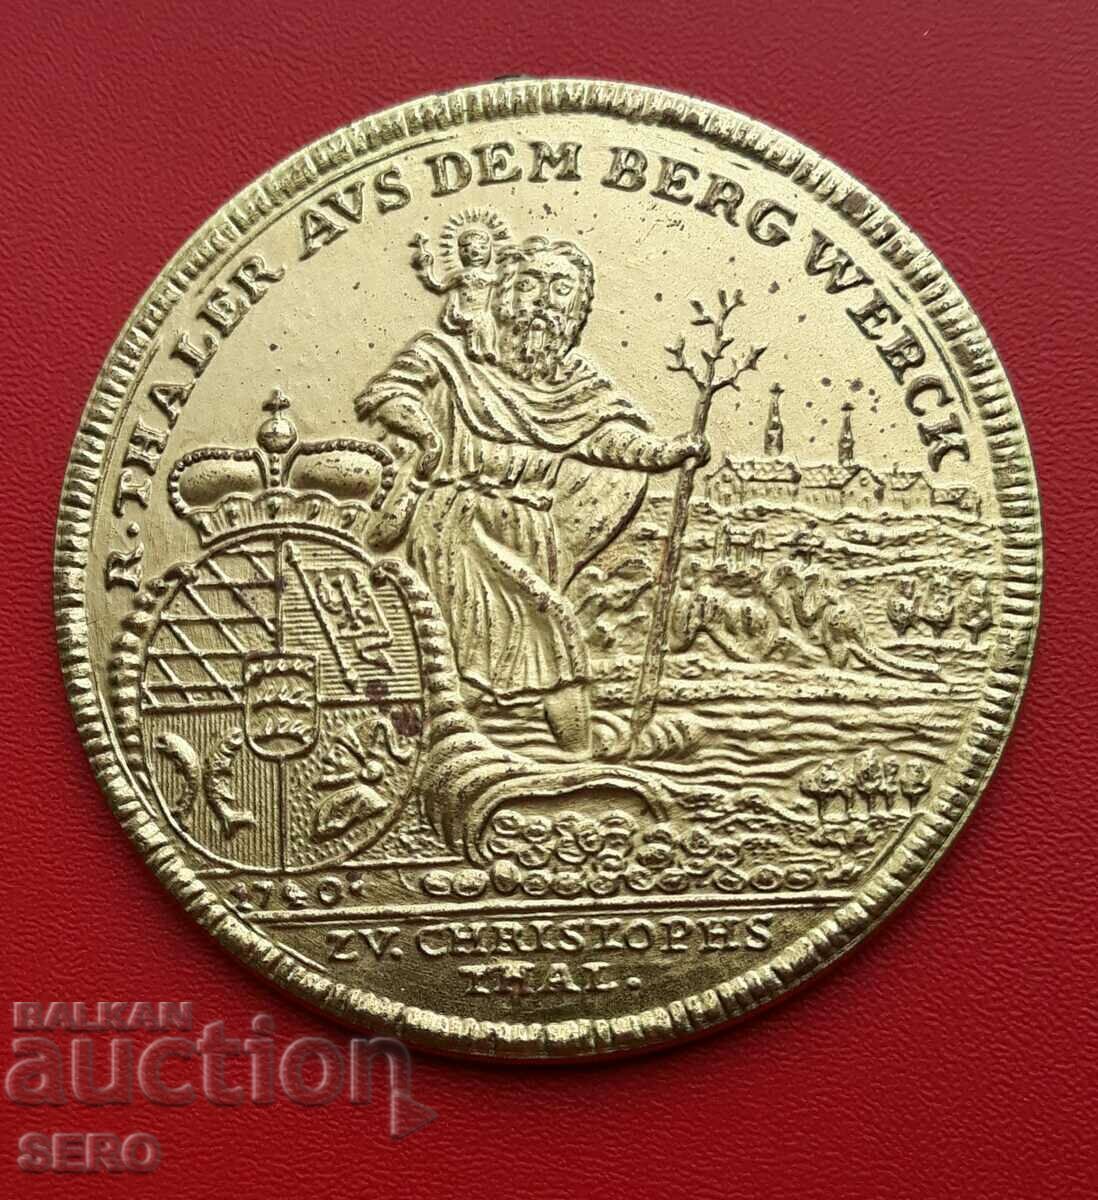 Germany-Zuffenhausen/there is the headquarters of Porsche/-medal 1976